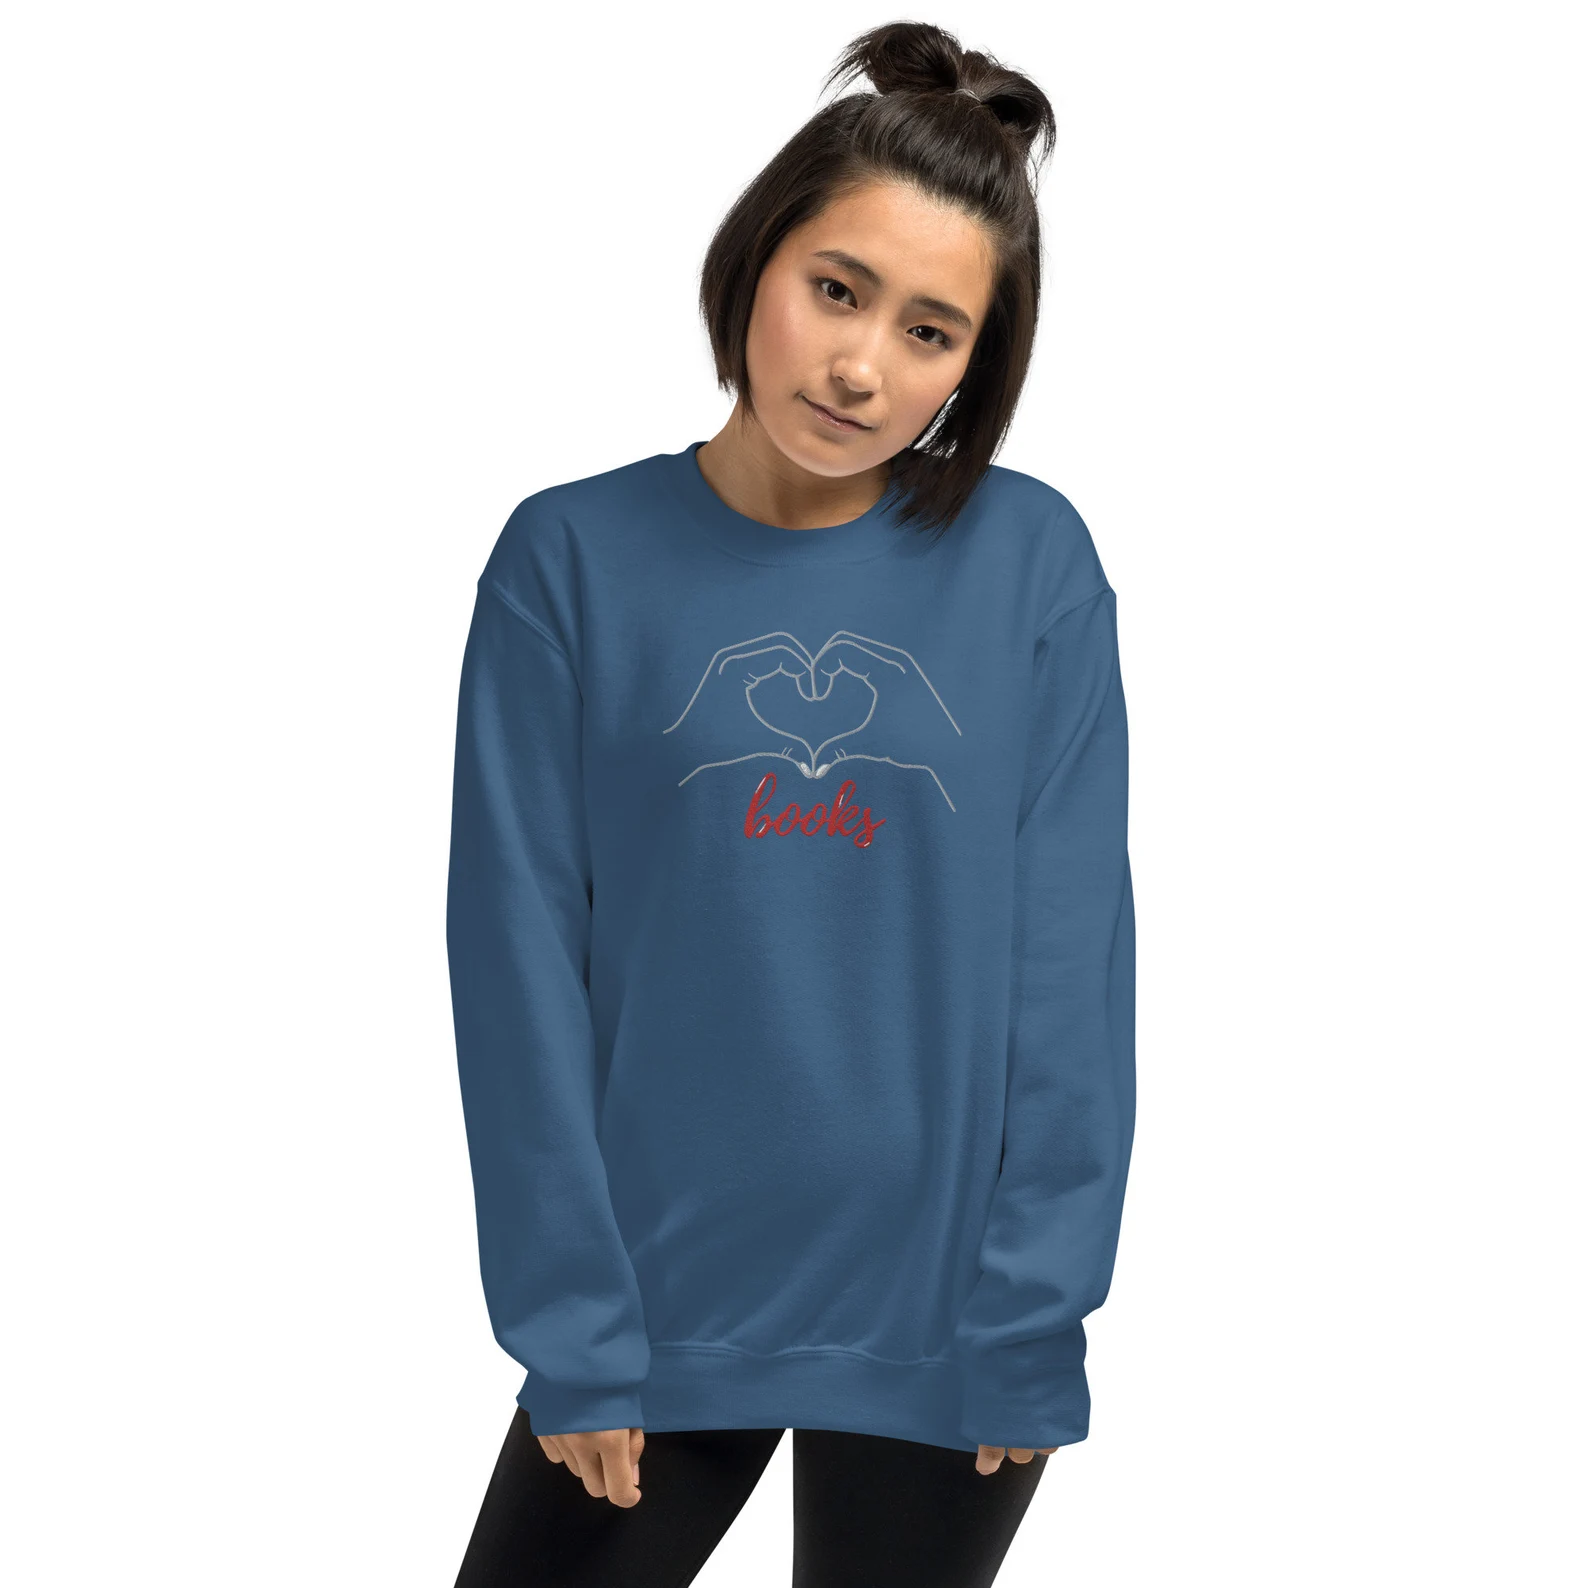 Image of a woman with olive skin wearing a blue sweatshirt. The sweatshirt has white embroidery of a heart made from two hands with the word "books" below. 